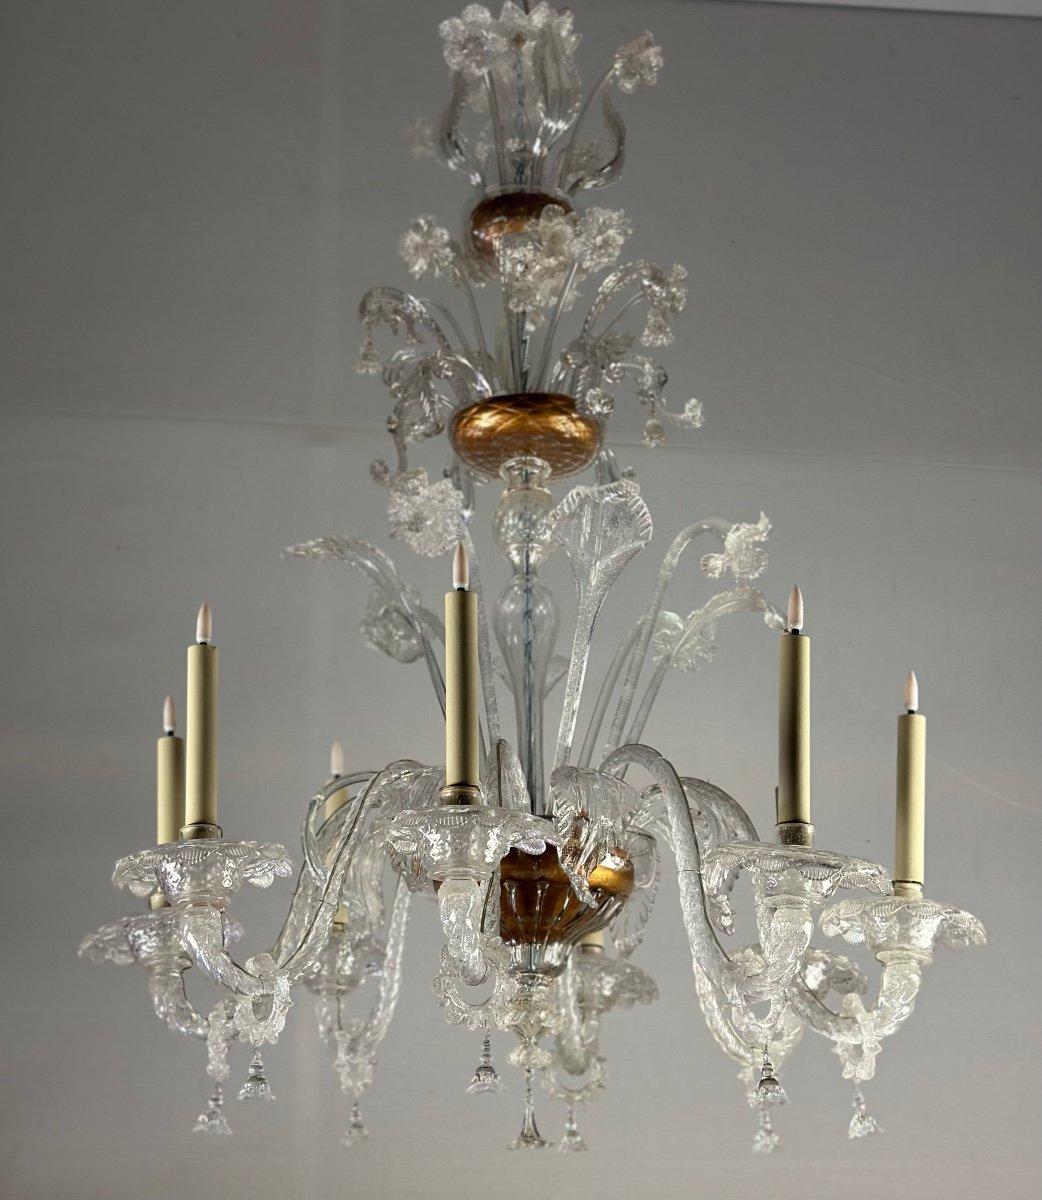 Colorless Murano Glass Chandelier 8 Arms Of Light Circa 1890 In Excellent Condition For Sale In Honnelles, WHT